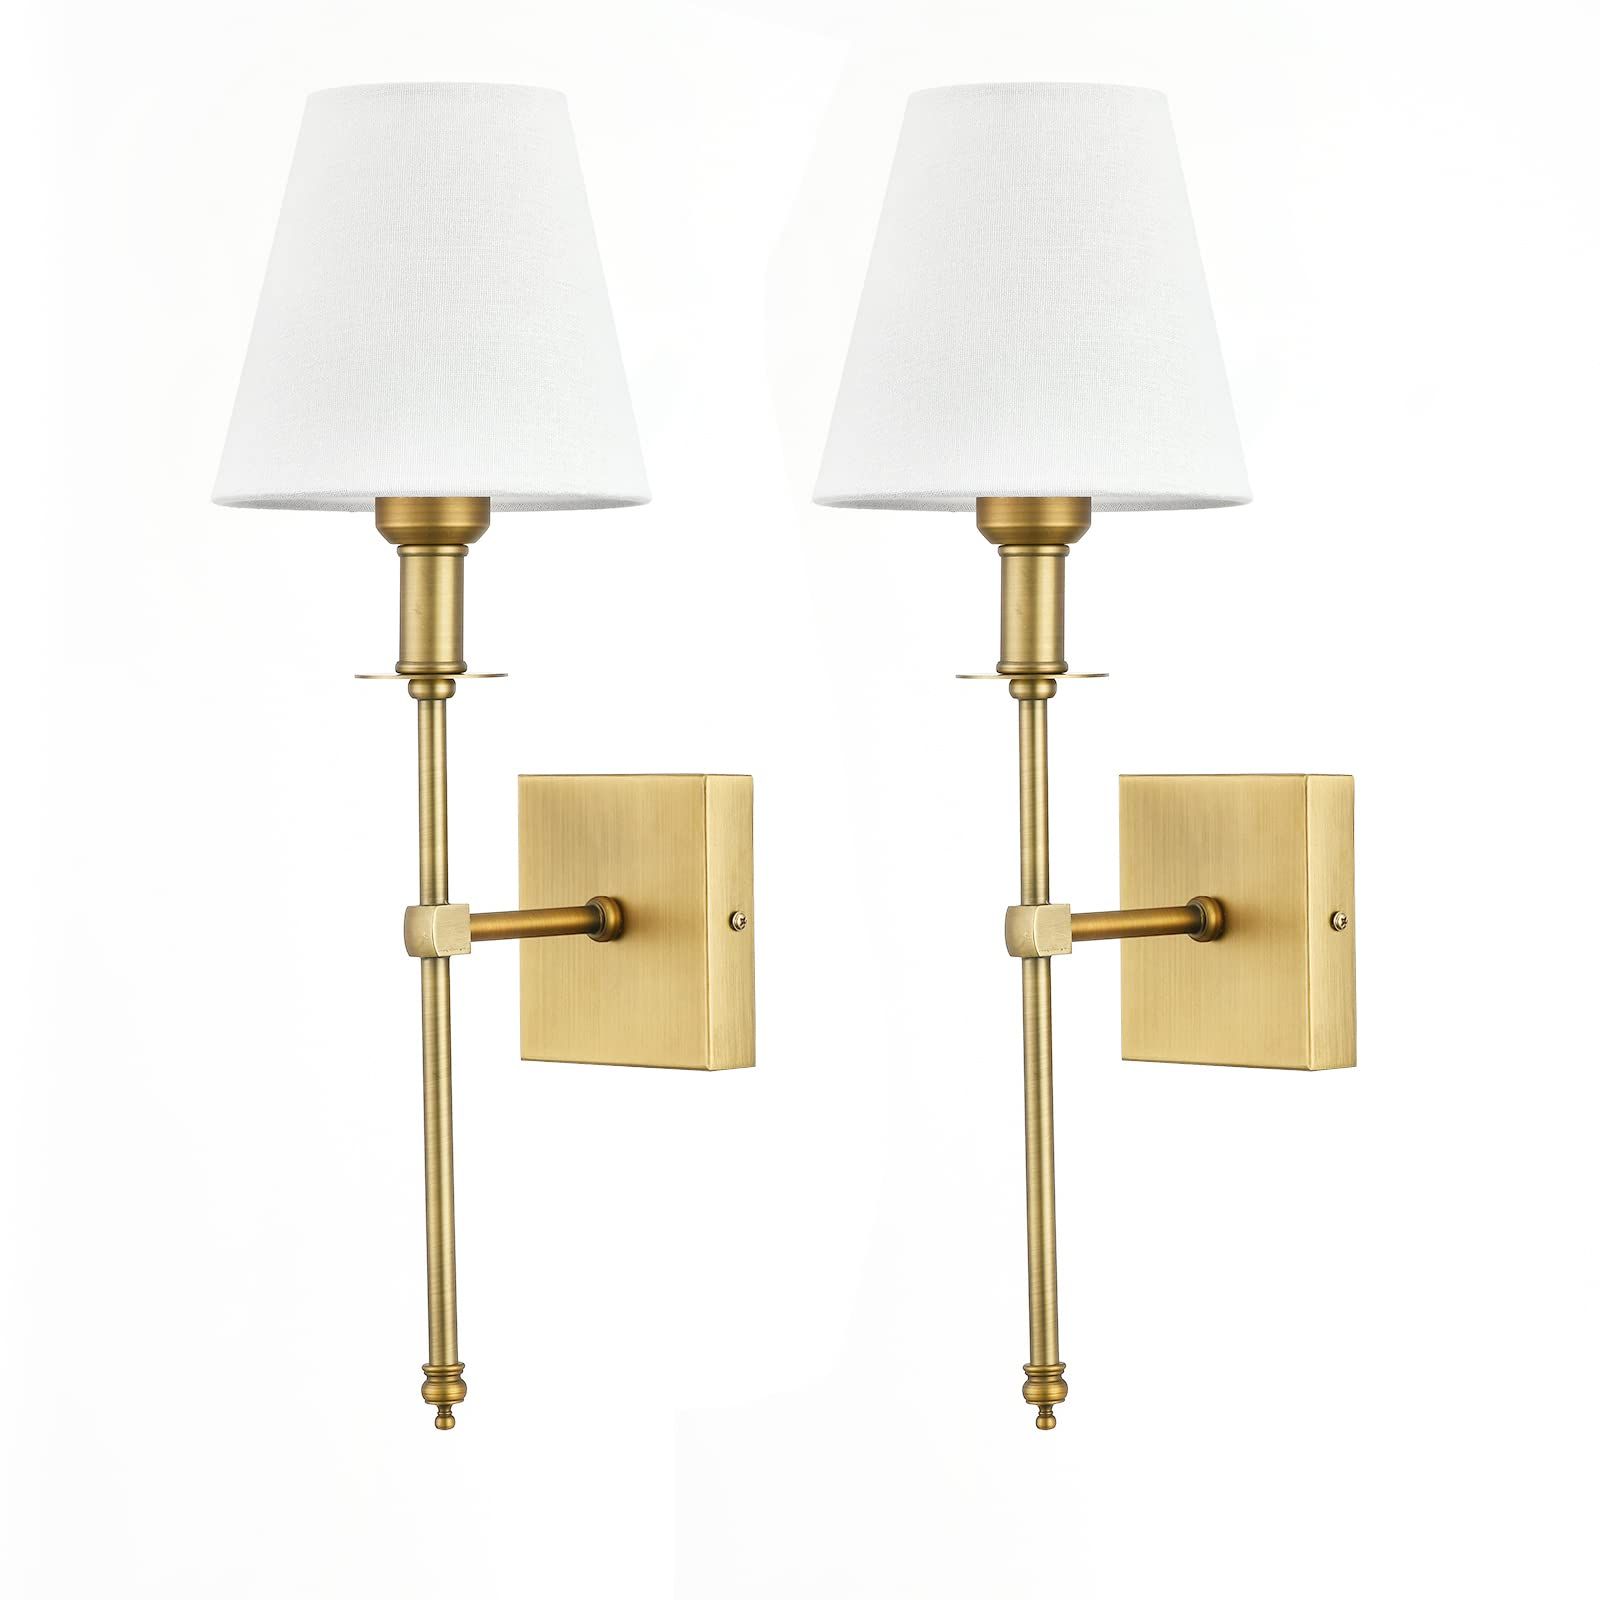 Bsmathom Wall Sconces Sets of 2, Brushed Brass Sconces Wall Lighting with Fabric Shade, Hardwired... | Amazon (US)